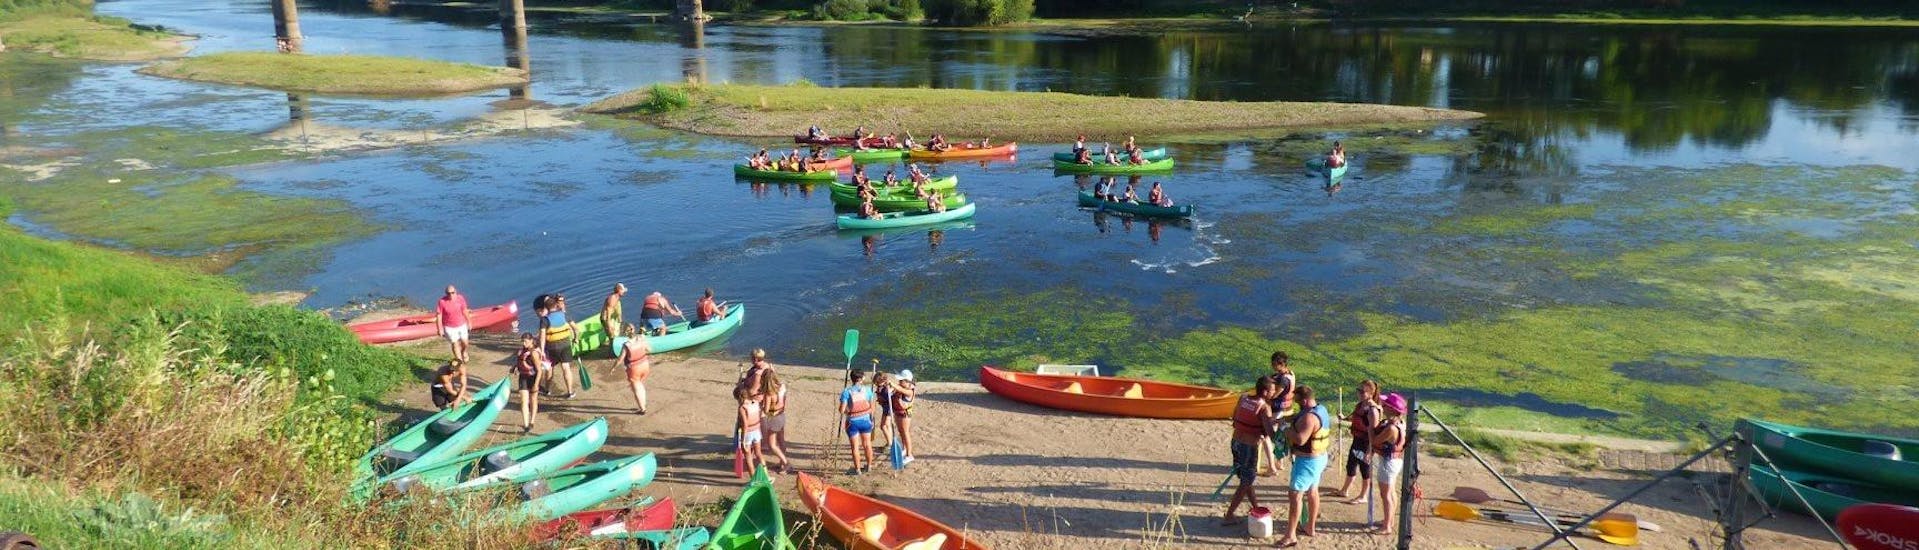 Holidaymakers are getting into the water for their canoeing tour on the Dordogne river with Canoe Kayak Port-Sainte-Foy.